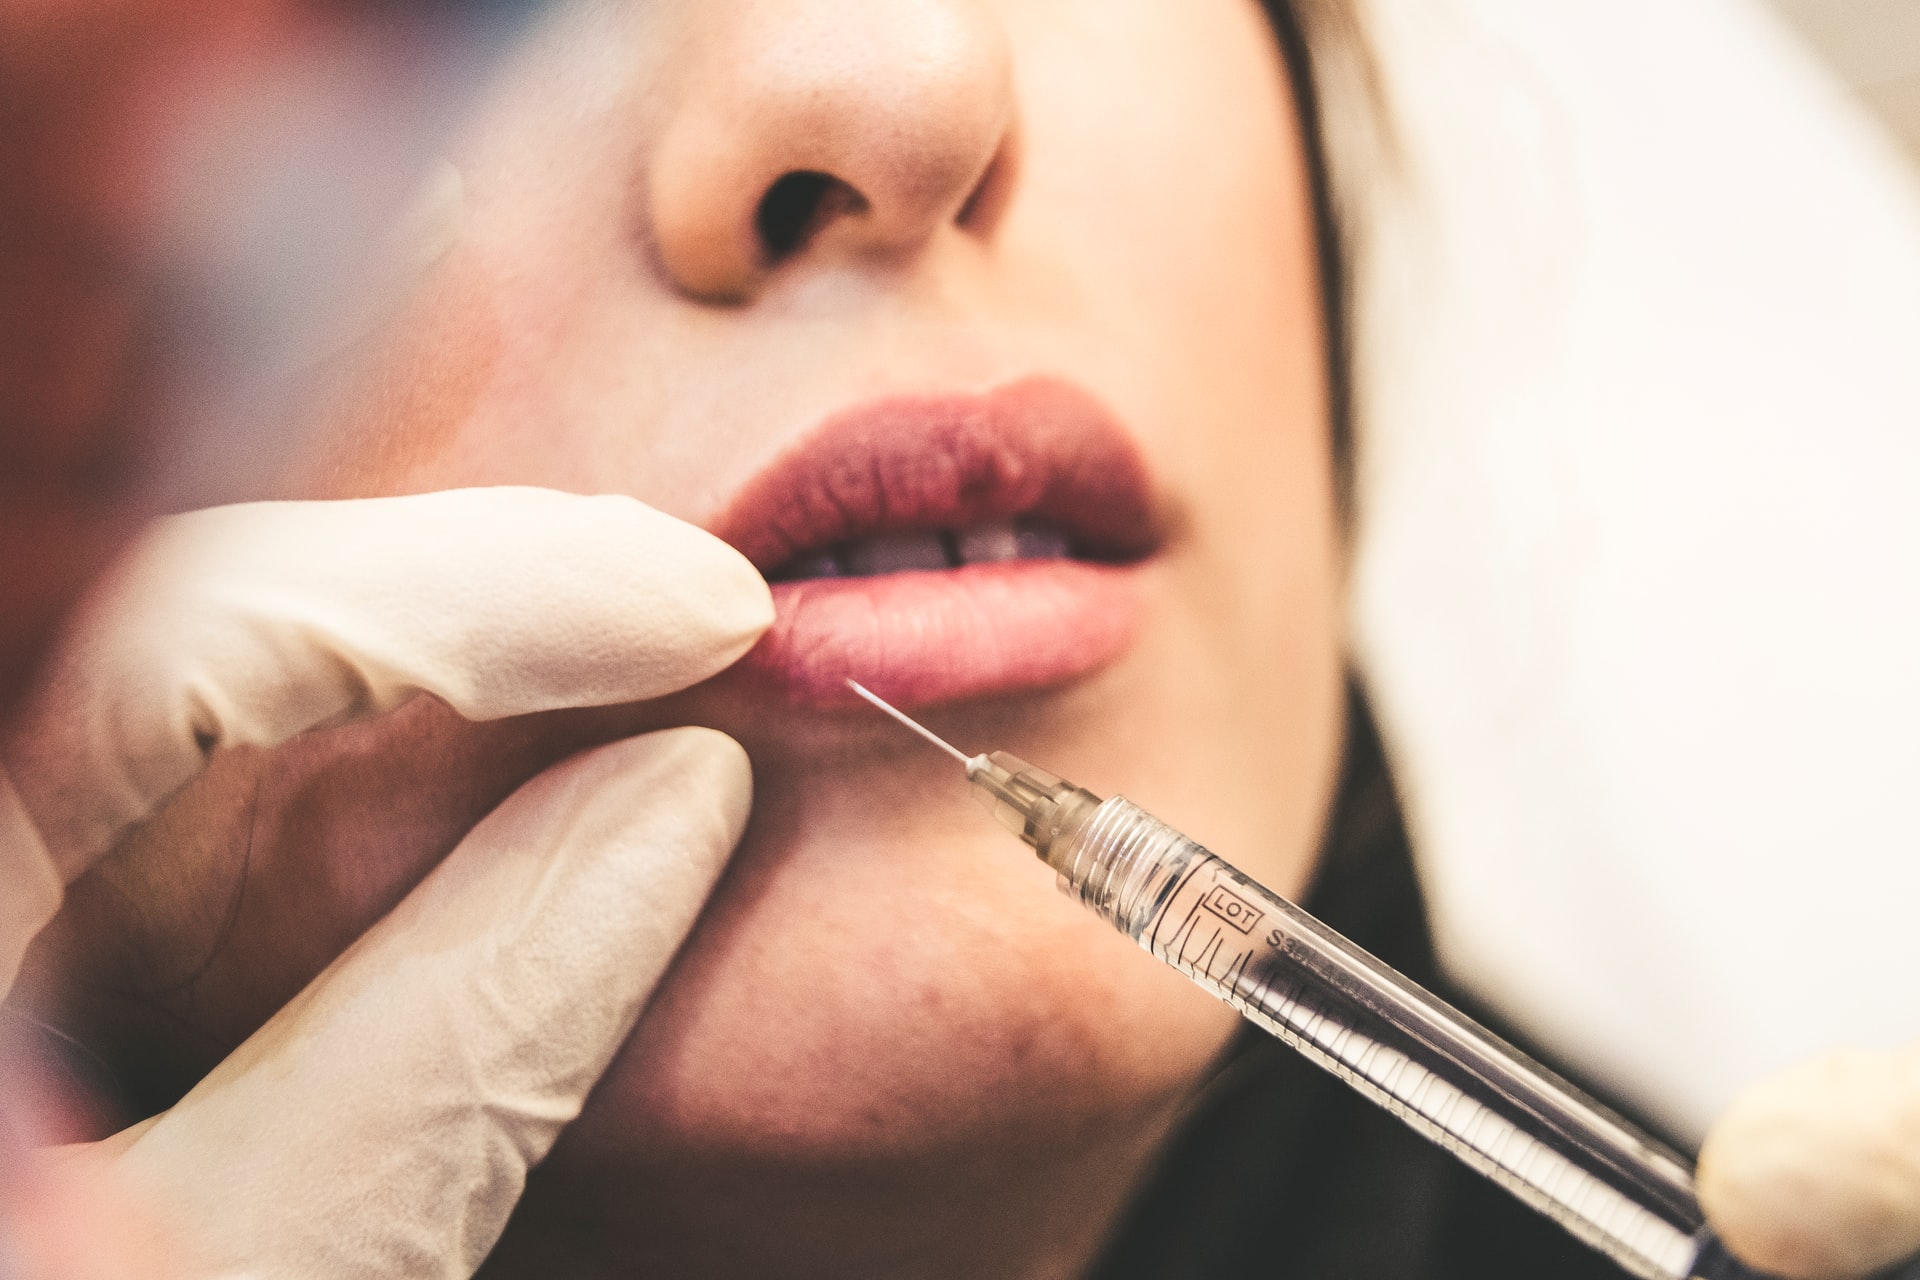 Why you should never trust off-brand injectable dermal fillers